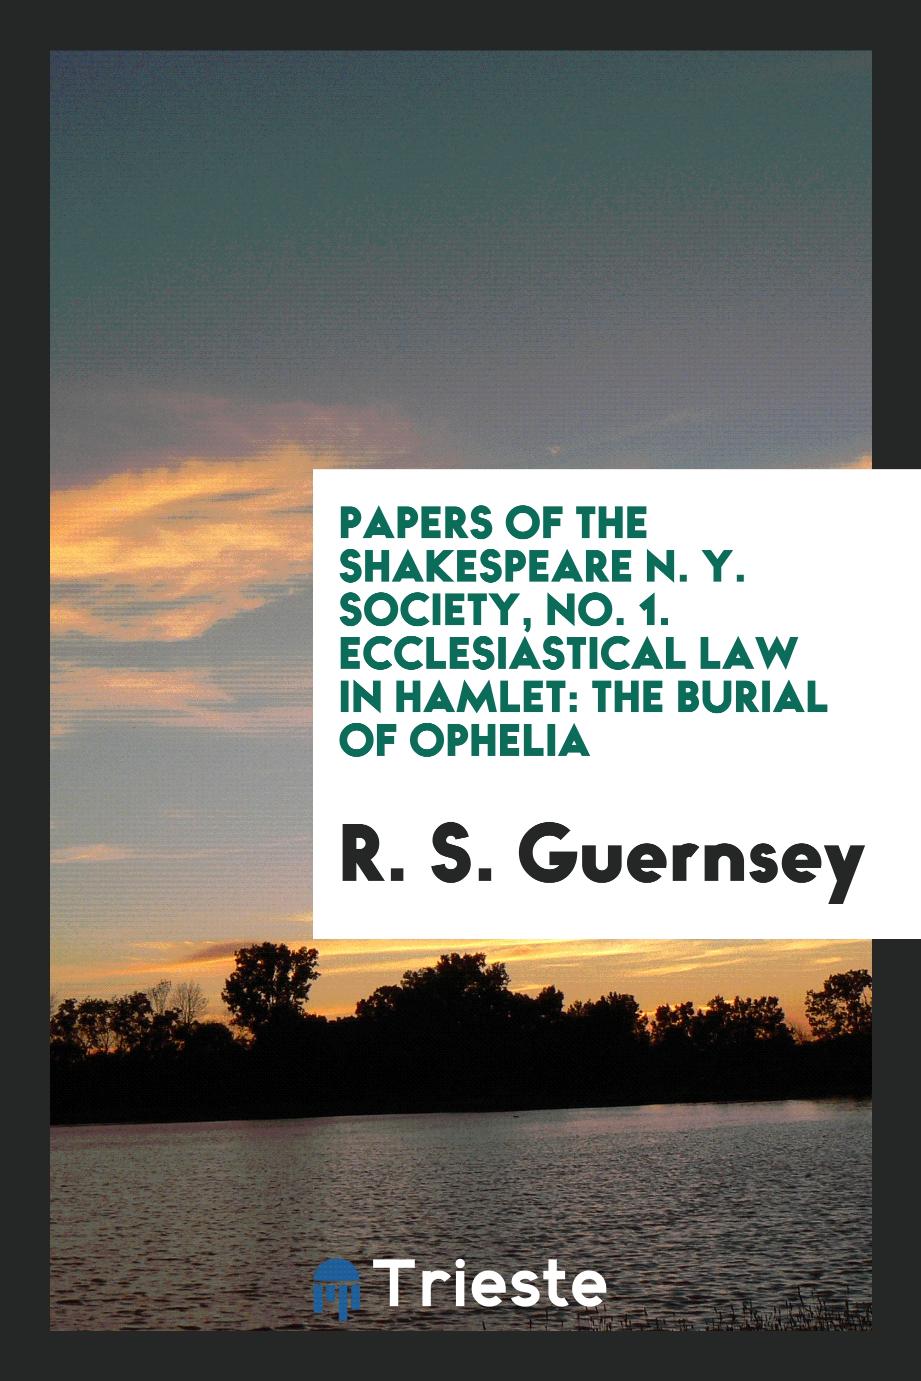 Papers of the Shakespeare N. Y. society, No. 1. Ecclesiastical Law in Hamlet: The Burial of Ophelia